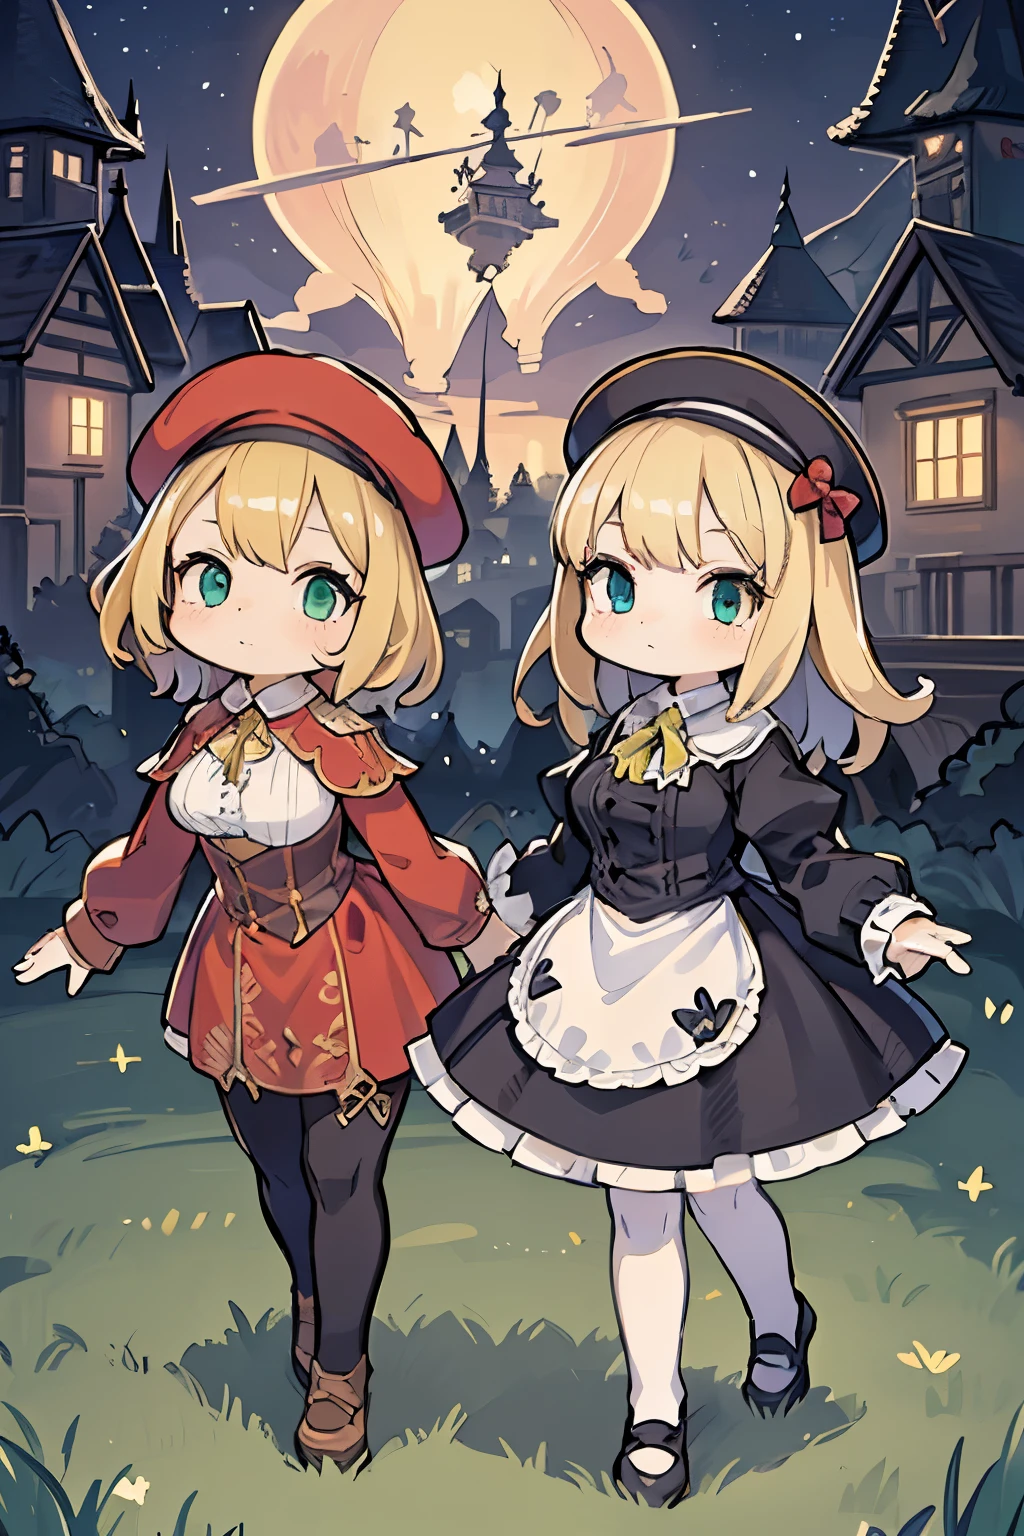 two girls, (Virginia Otis, 15 years old (blond hair, blue eyes)) pose with (16 years old Georgie Gerald (blond hair, green eyes)). Victorian style. thin, cute face, walks at night in Canterville Castle (inspired by the novel The Canterville Ghost). aged 1887, Victorian fantasy